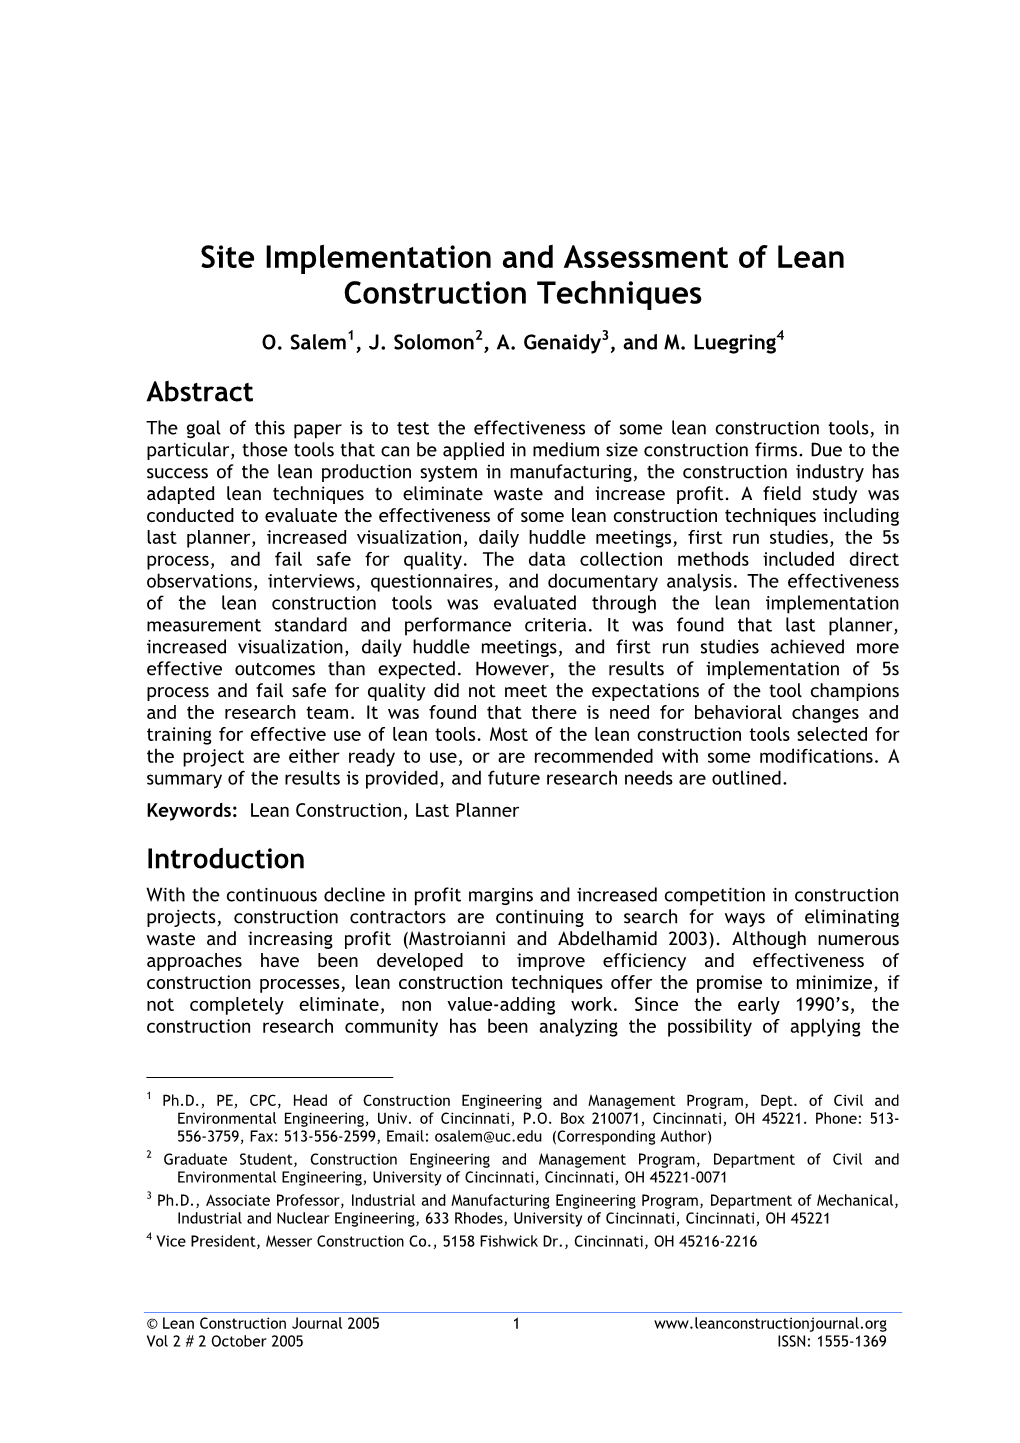 Application of the Principles of Lean